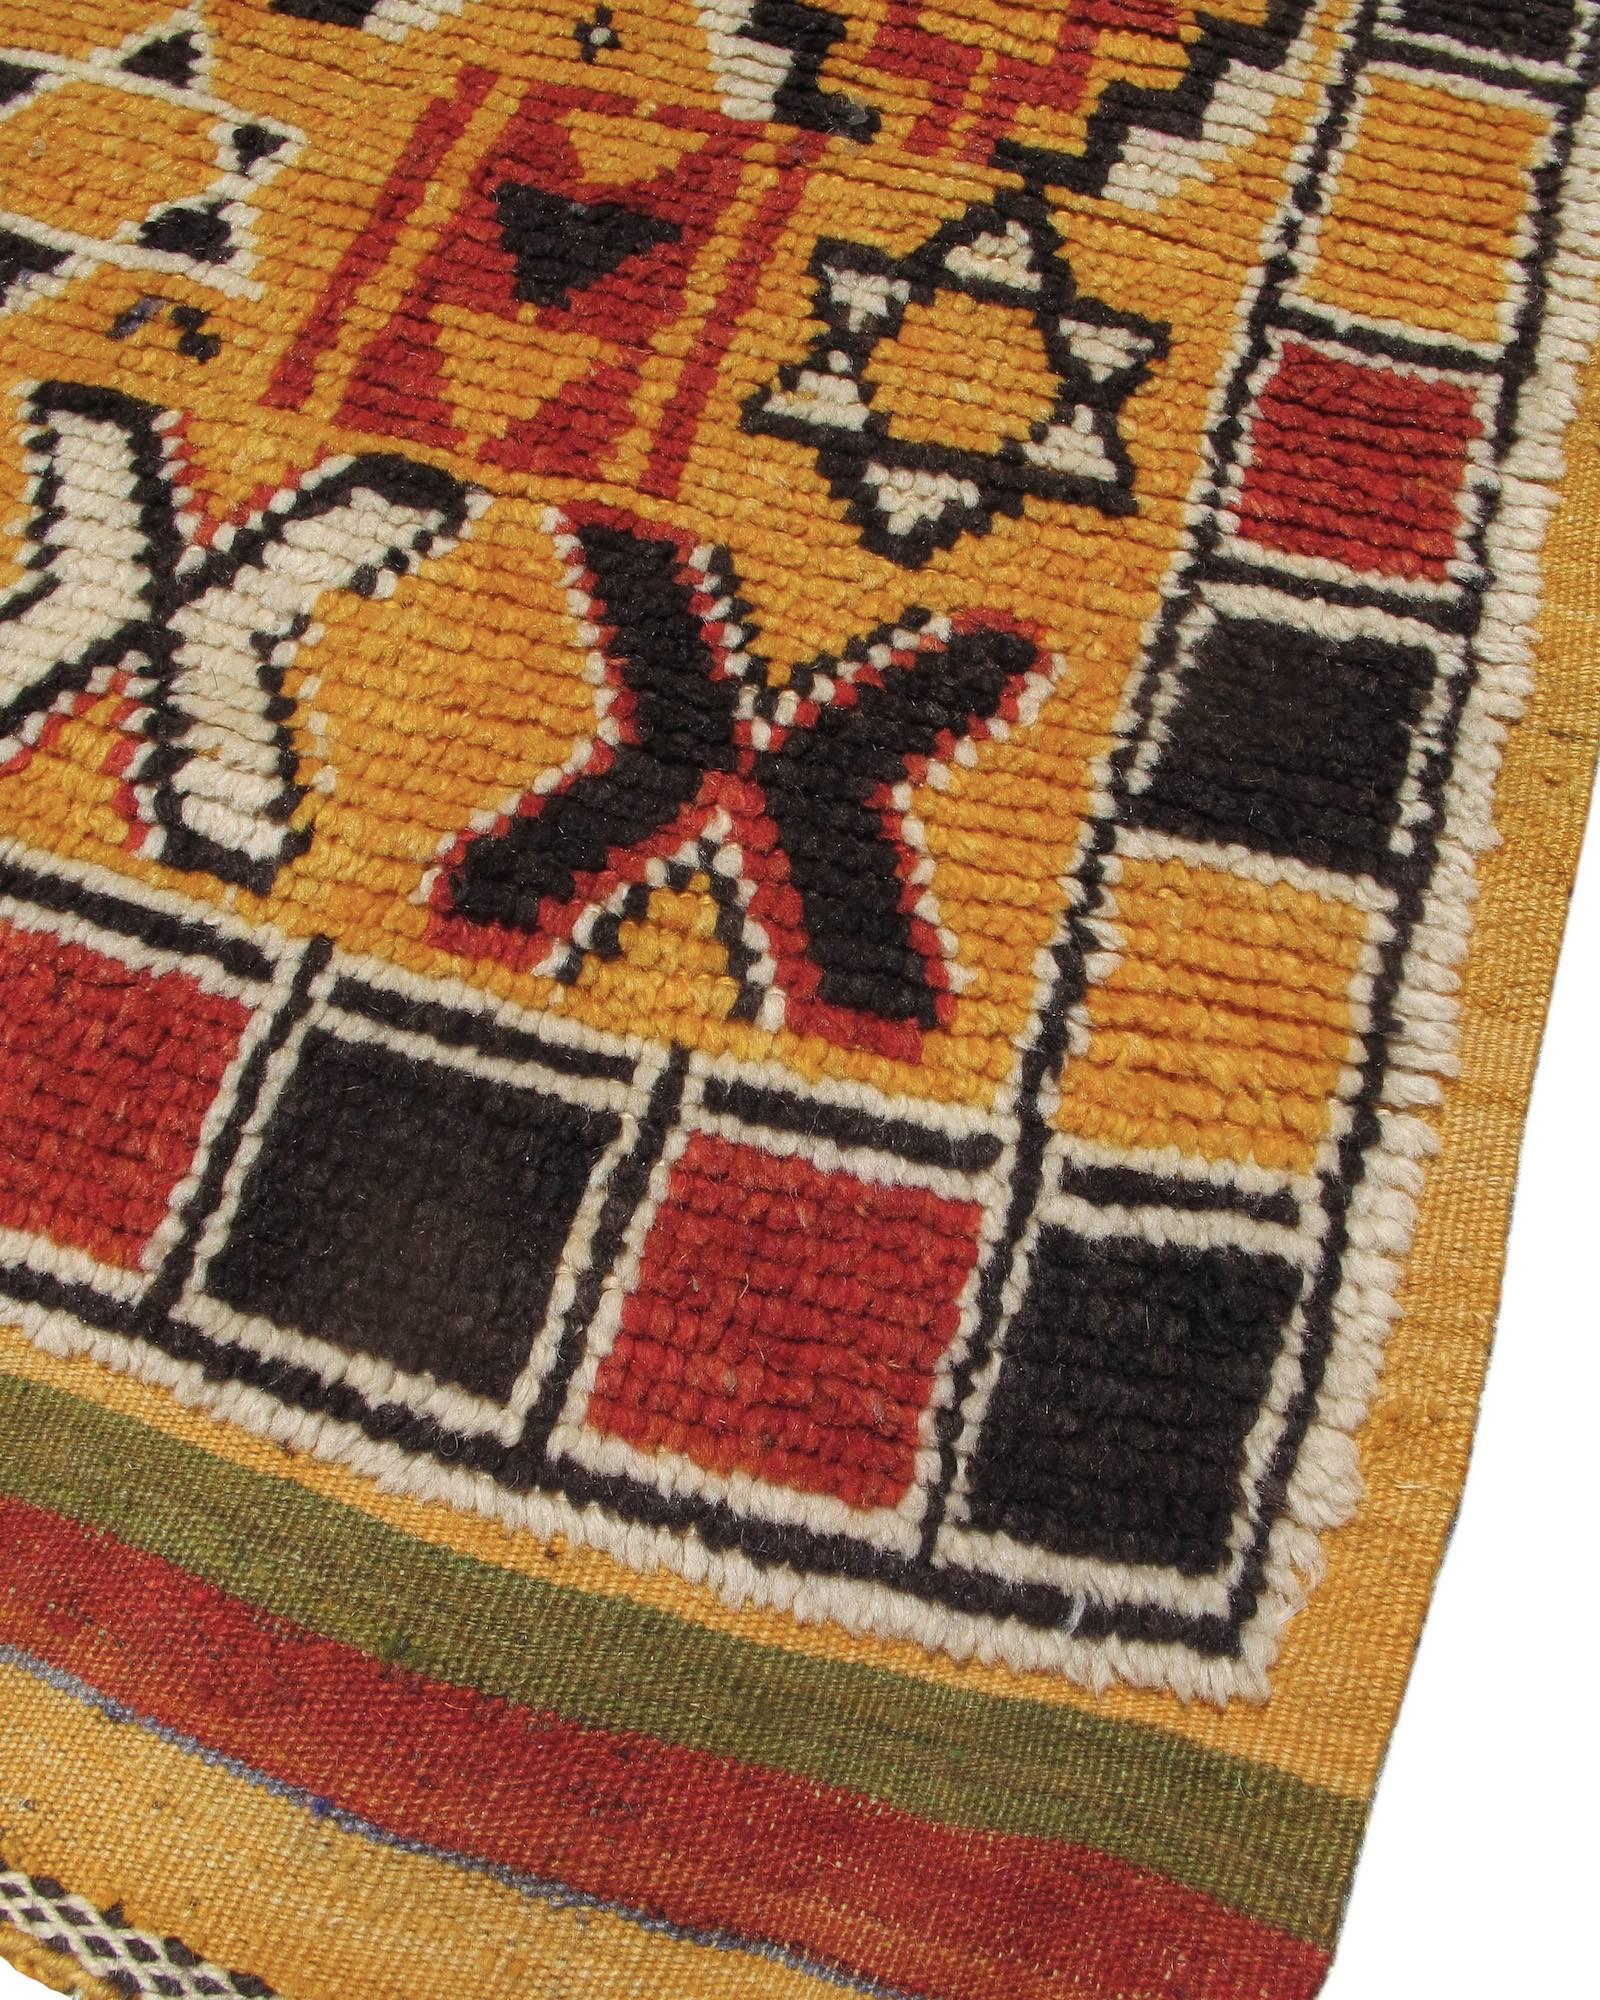 This pleasantly geometric Moroccan rug melds a field design of reciprocal stepped diamonds with a simple border of alternating black and red boxes. Of particular interest are two rows of six-pointed stars, perhaps reflective of the historically